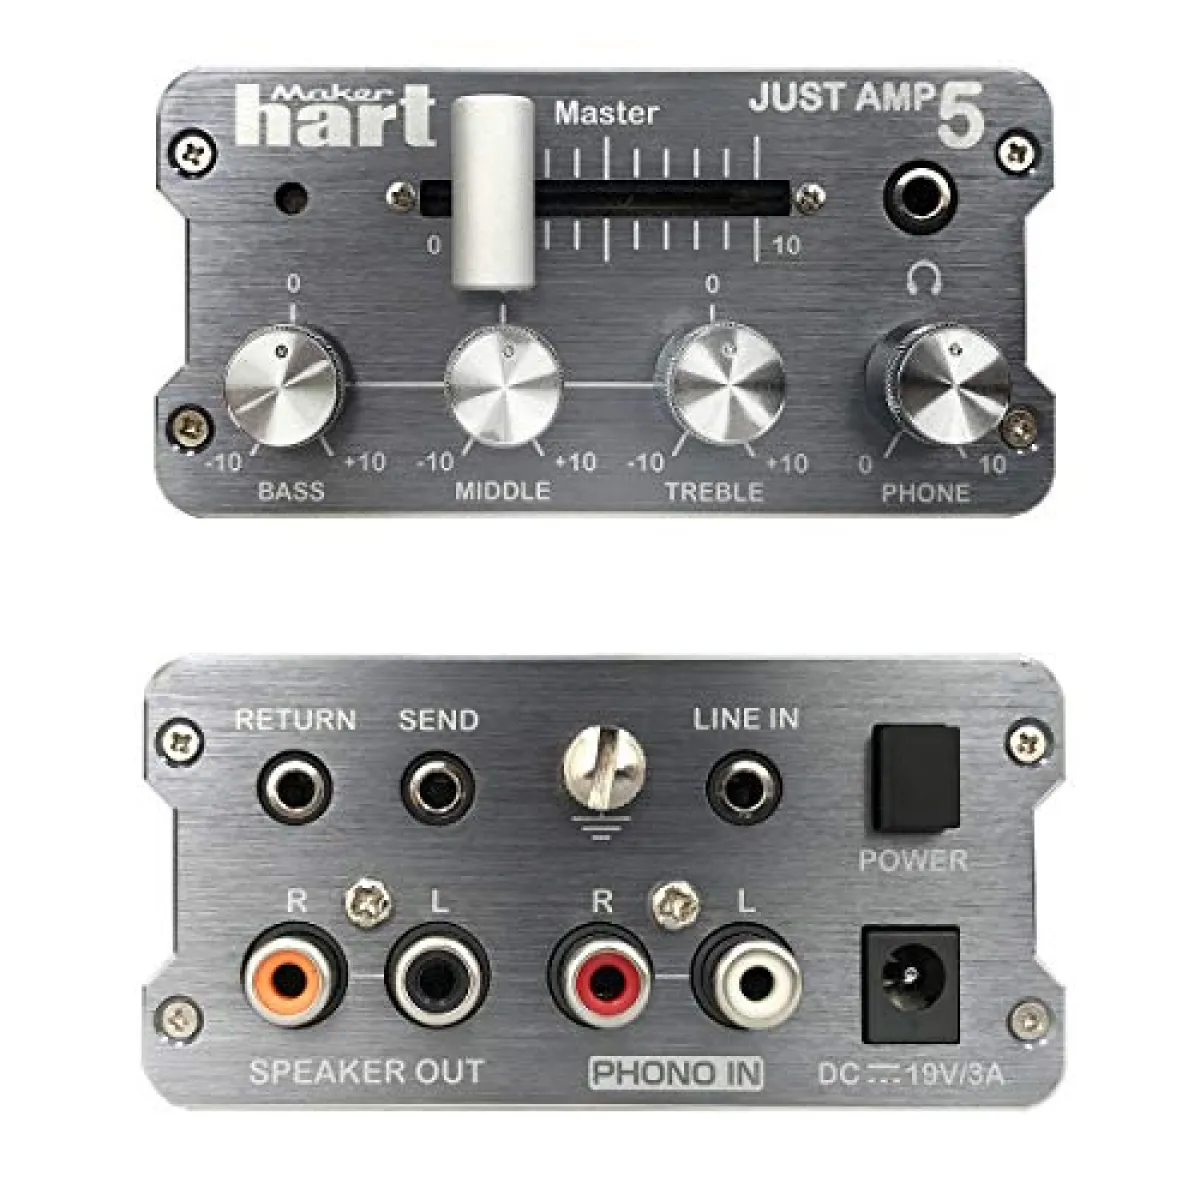 Maker Hart Just Amp 5 - Compact Integrated Amplifier with Phono 